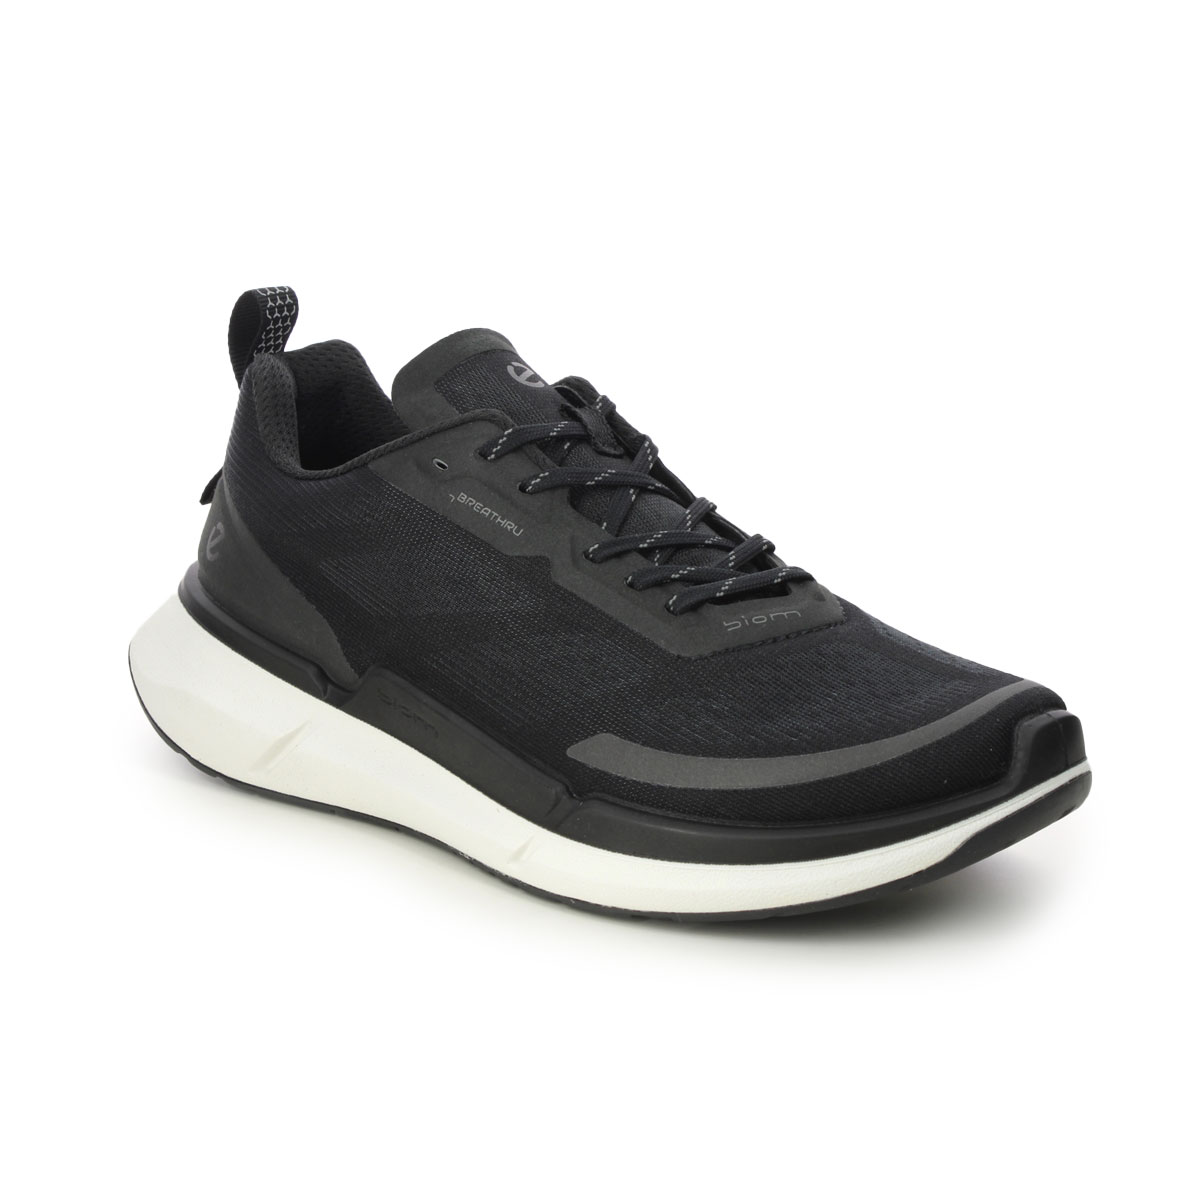 ECCO Biom 2.2 Ladies Black White Womens trainers 830753-00101 in a Plain Man-made in Size 37